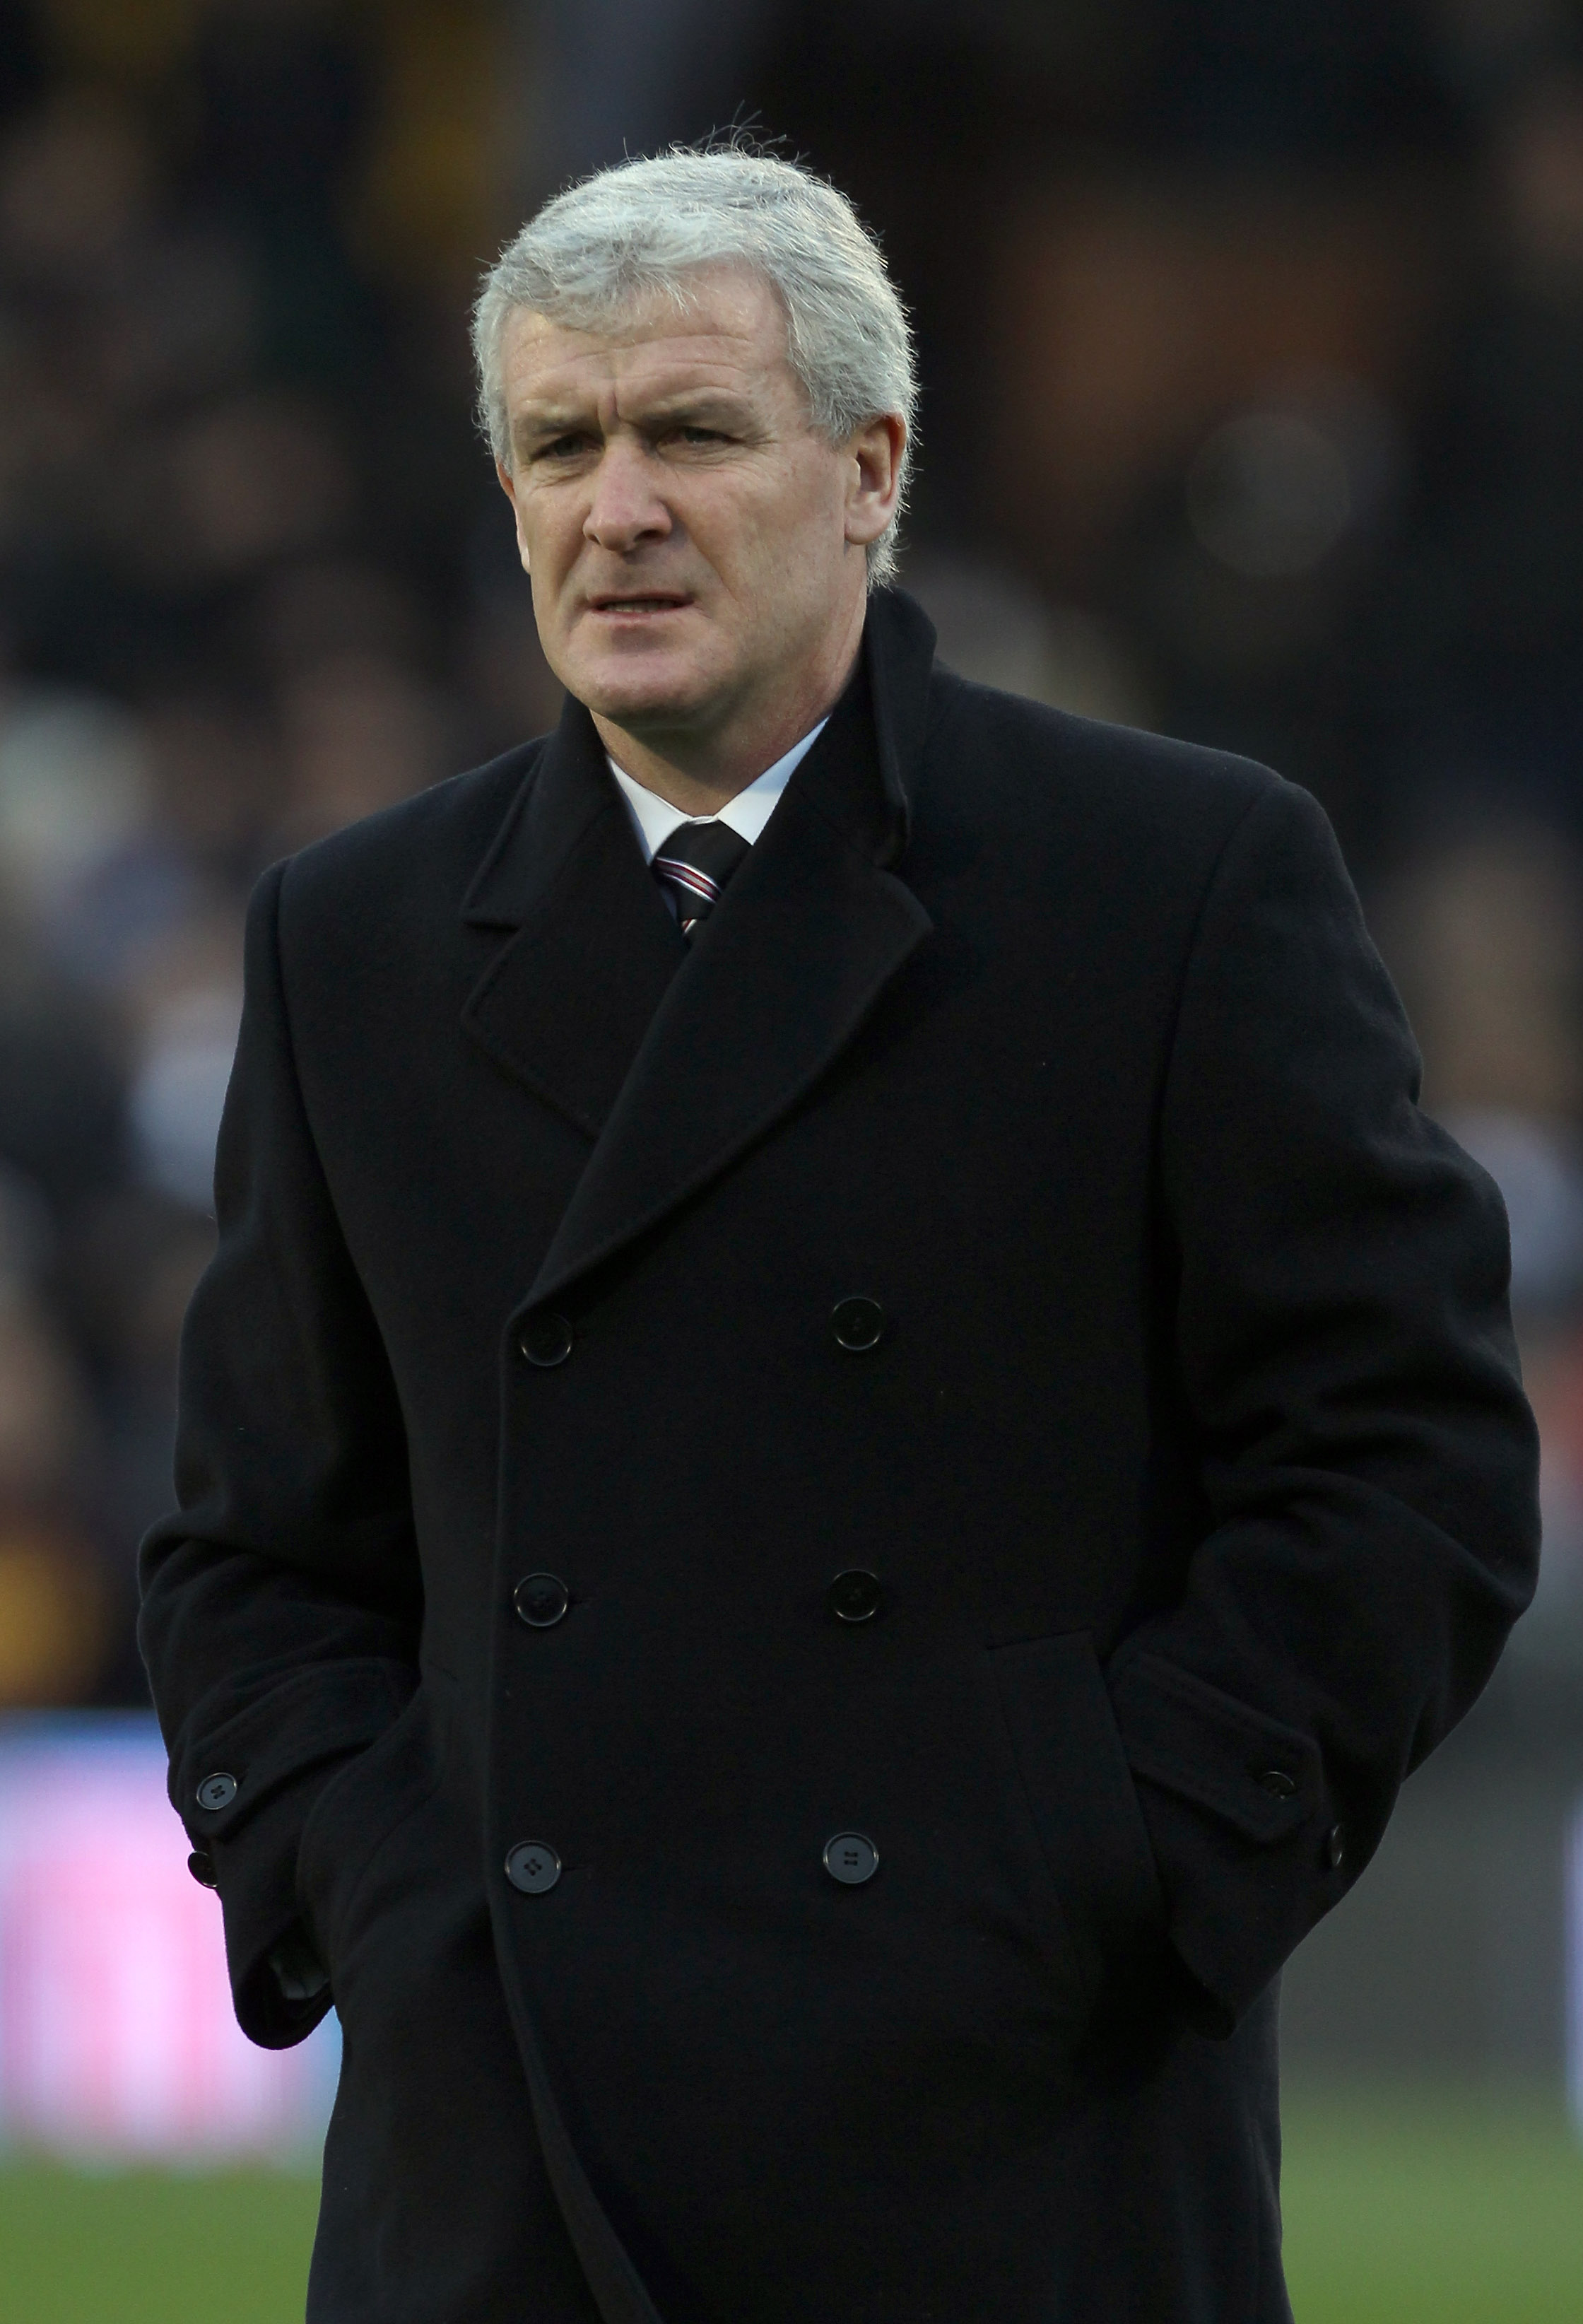 LONDON, ENGLAND - NOVEMBER 27:  Fulham manager Mark Hughes looks on at during the Barclays Premier League match between Fulham and Birmingham City at Craven Cottage on November 27, 2010 in London, England.  (Photo by Ian Walton/Getty Images)